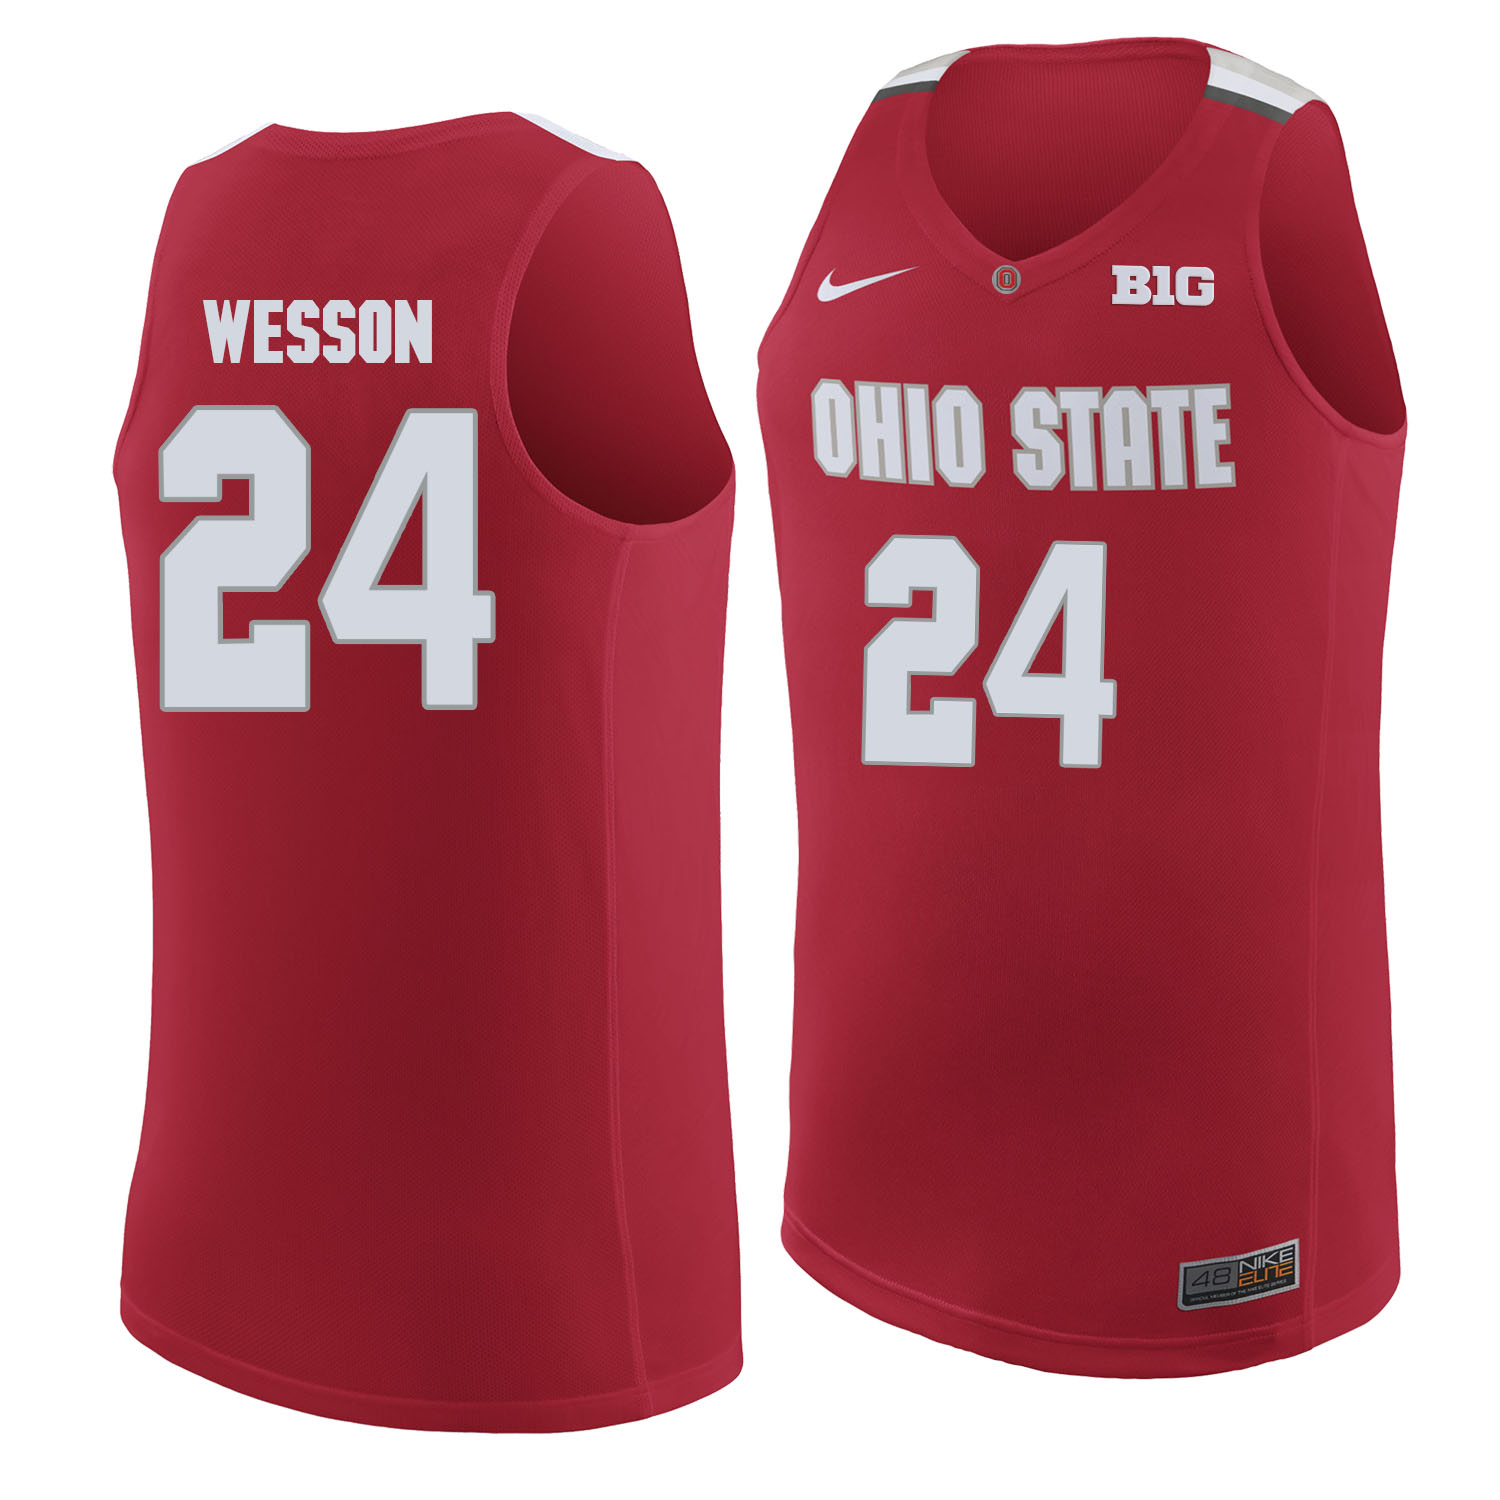 Ohio State Buckeyes 24 Andre Wesson Red College Basketball Jersey